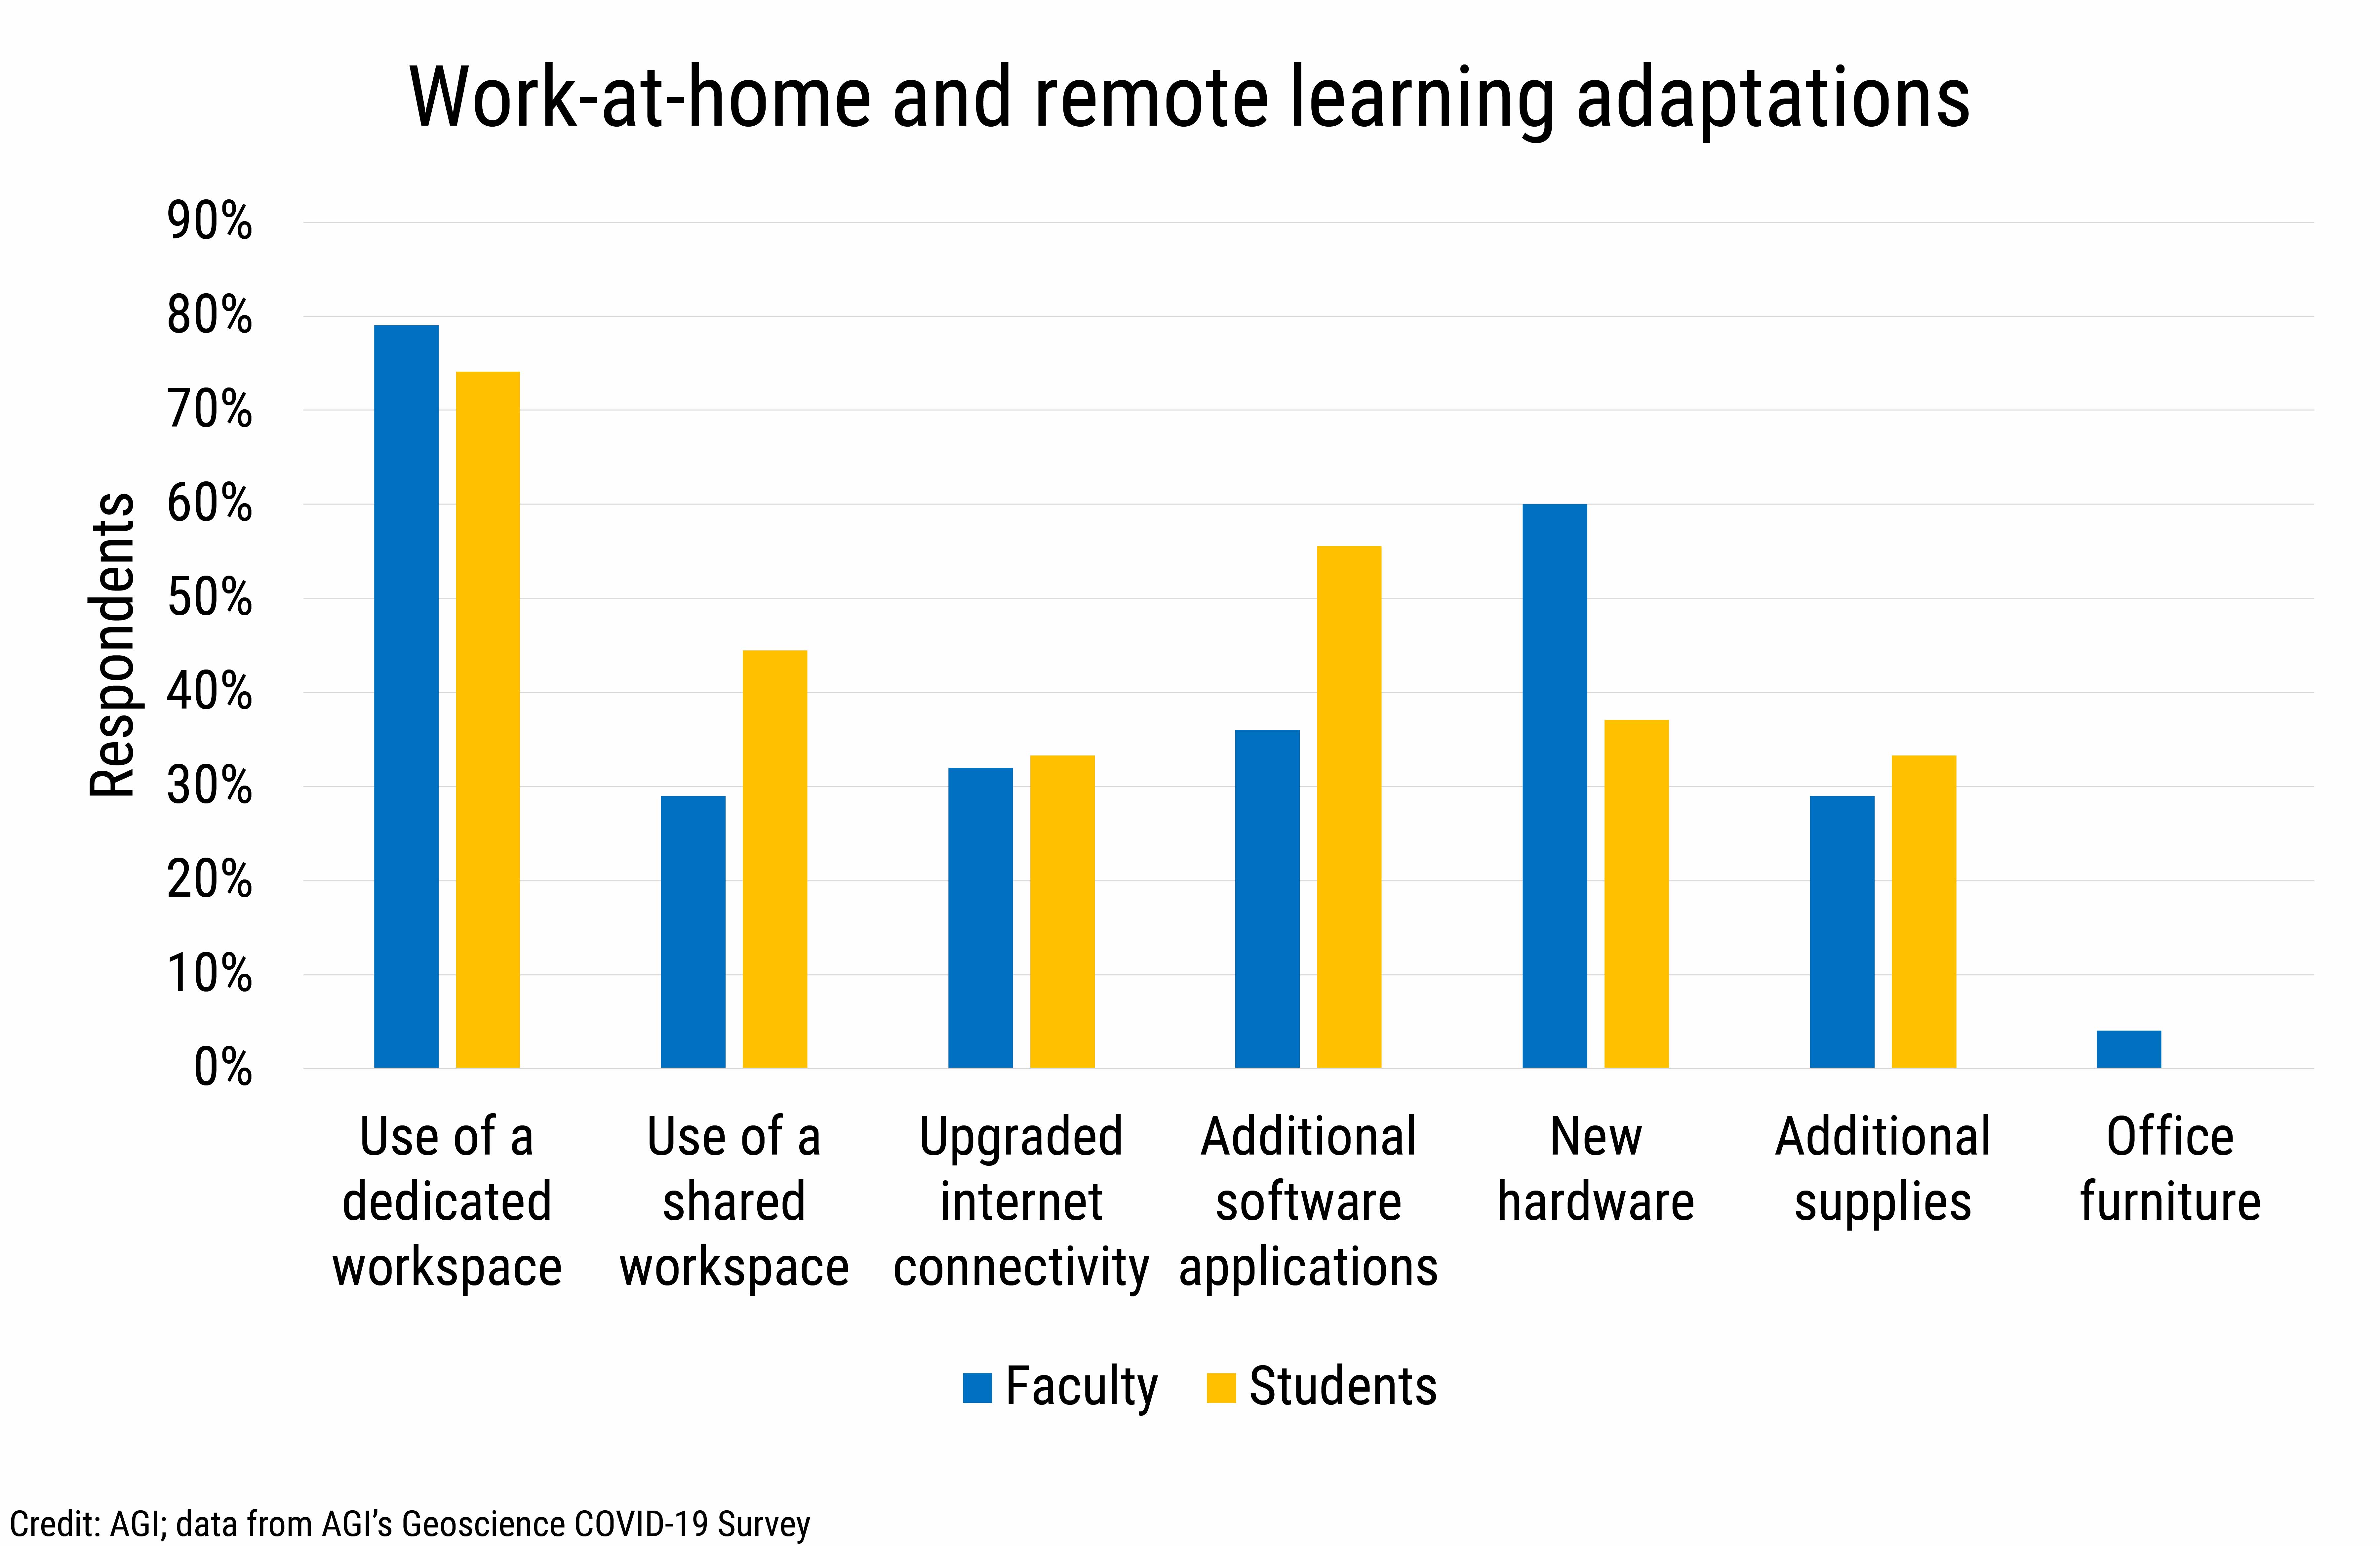 DB_2021-018 chart 01: Work-at-home and remote learning adaptations (Credit: AGI; data from AGI&#039;s Geoscience COVID-19 Survey)